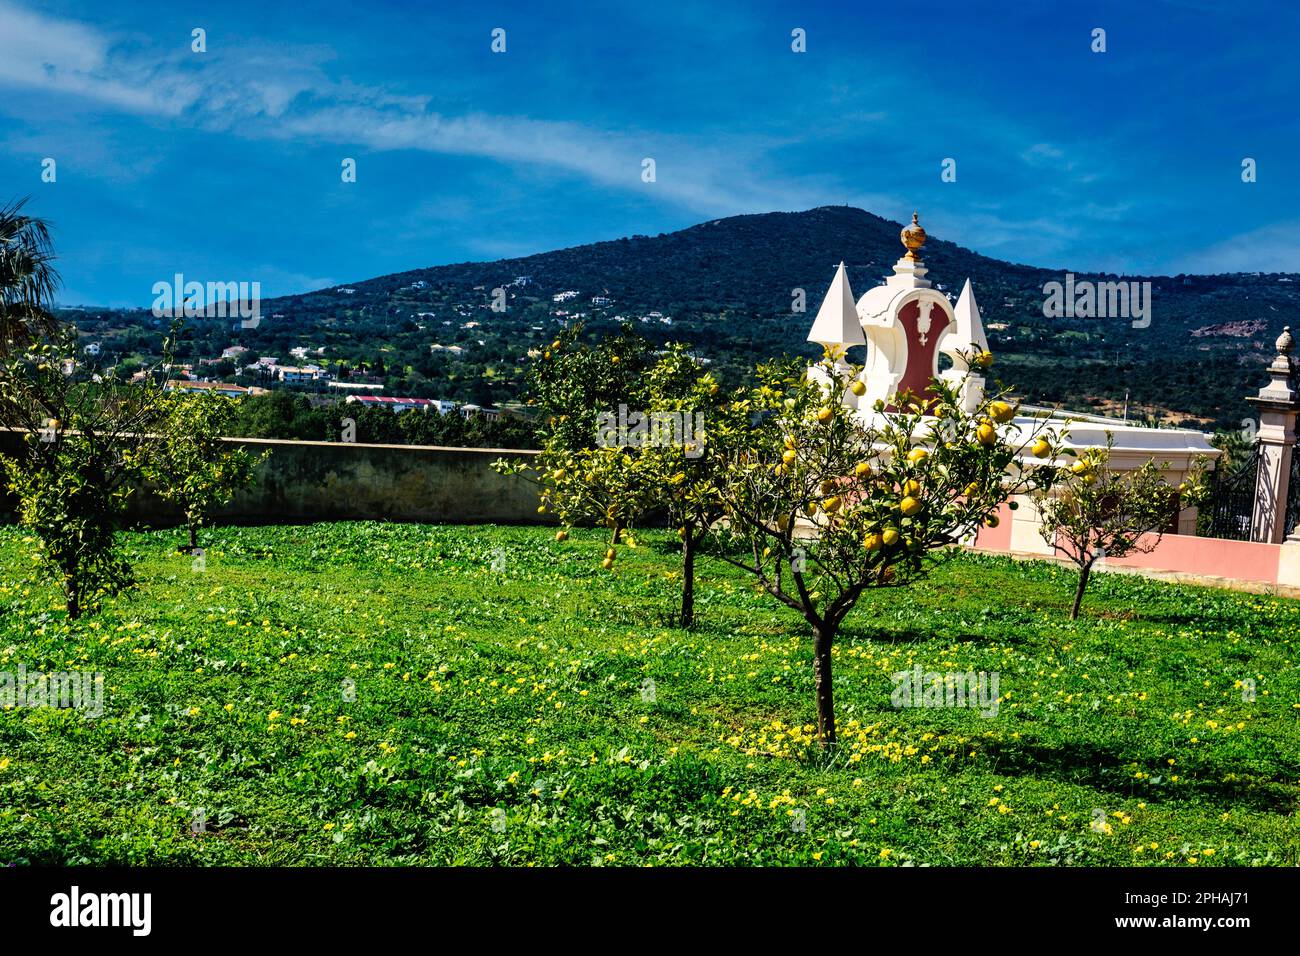 A small lemon grove in the grounds of the Estoi Palace Hotel in Portugal Stock Photo